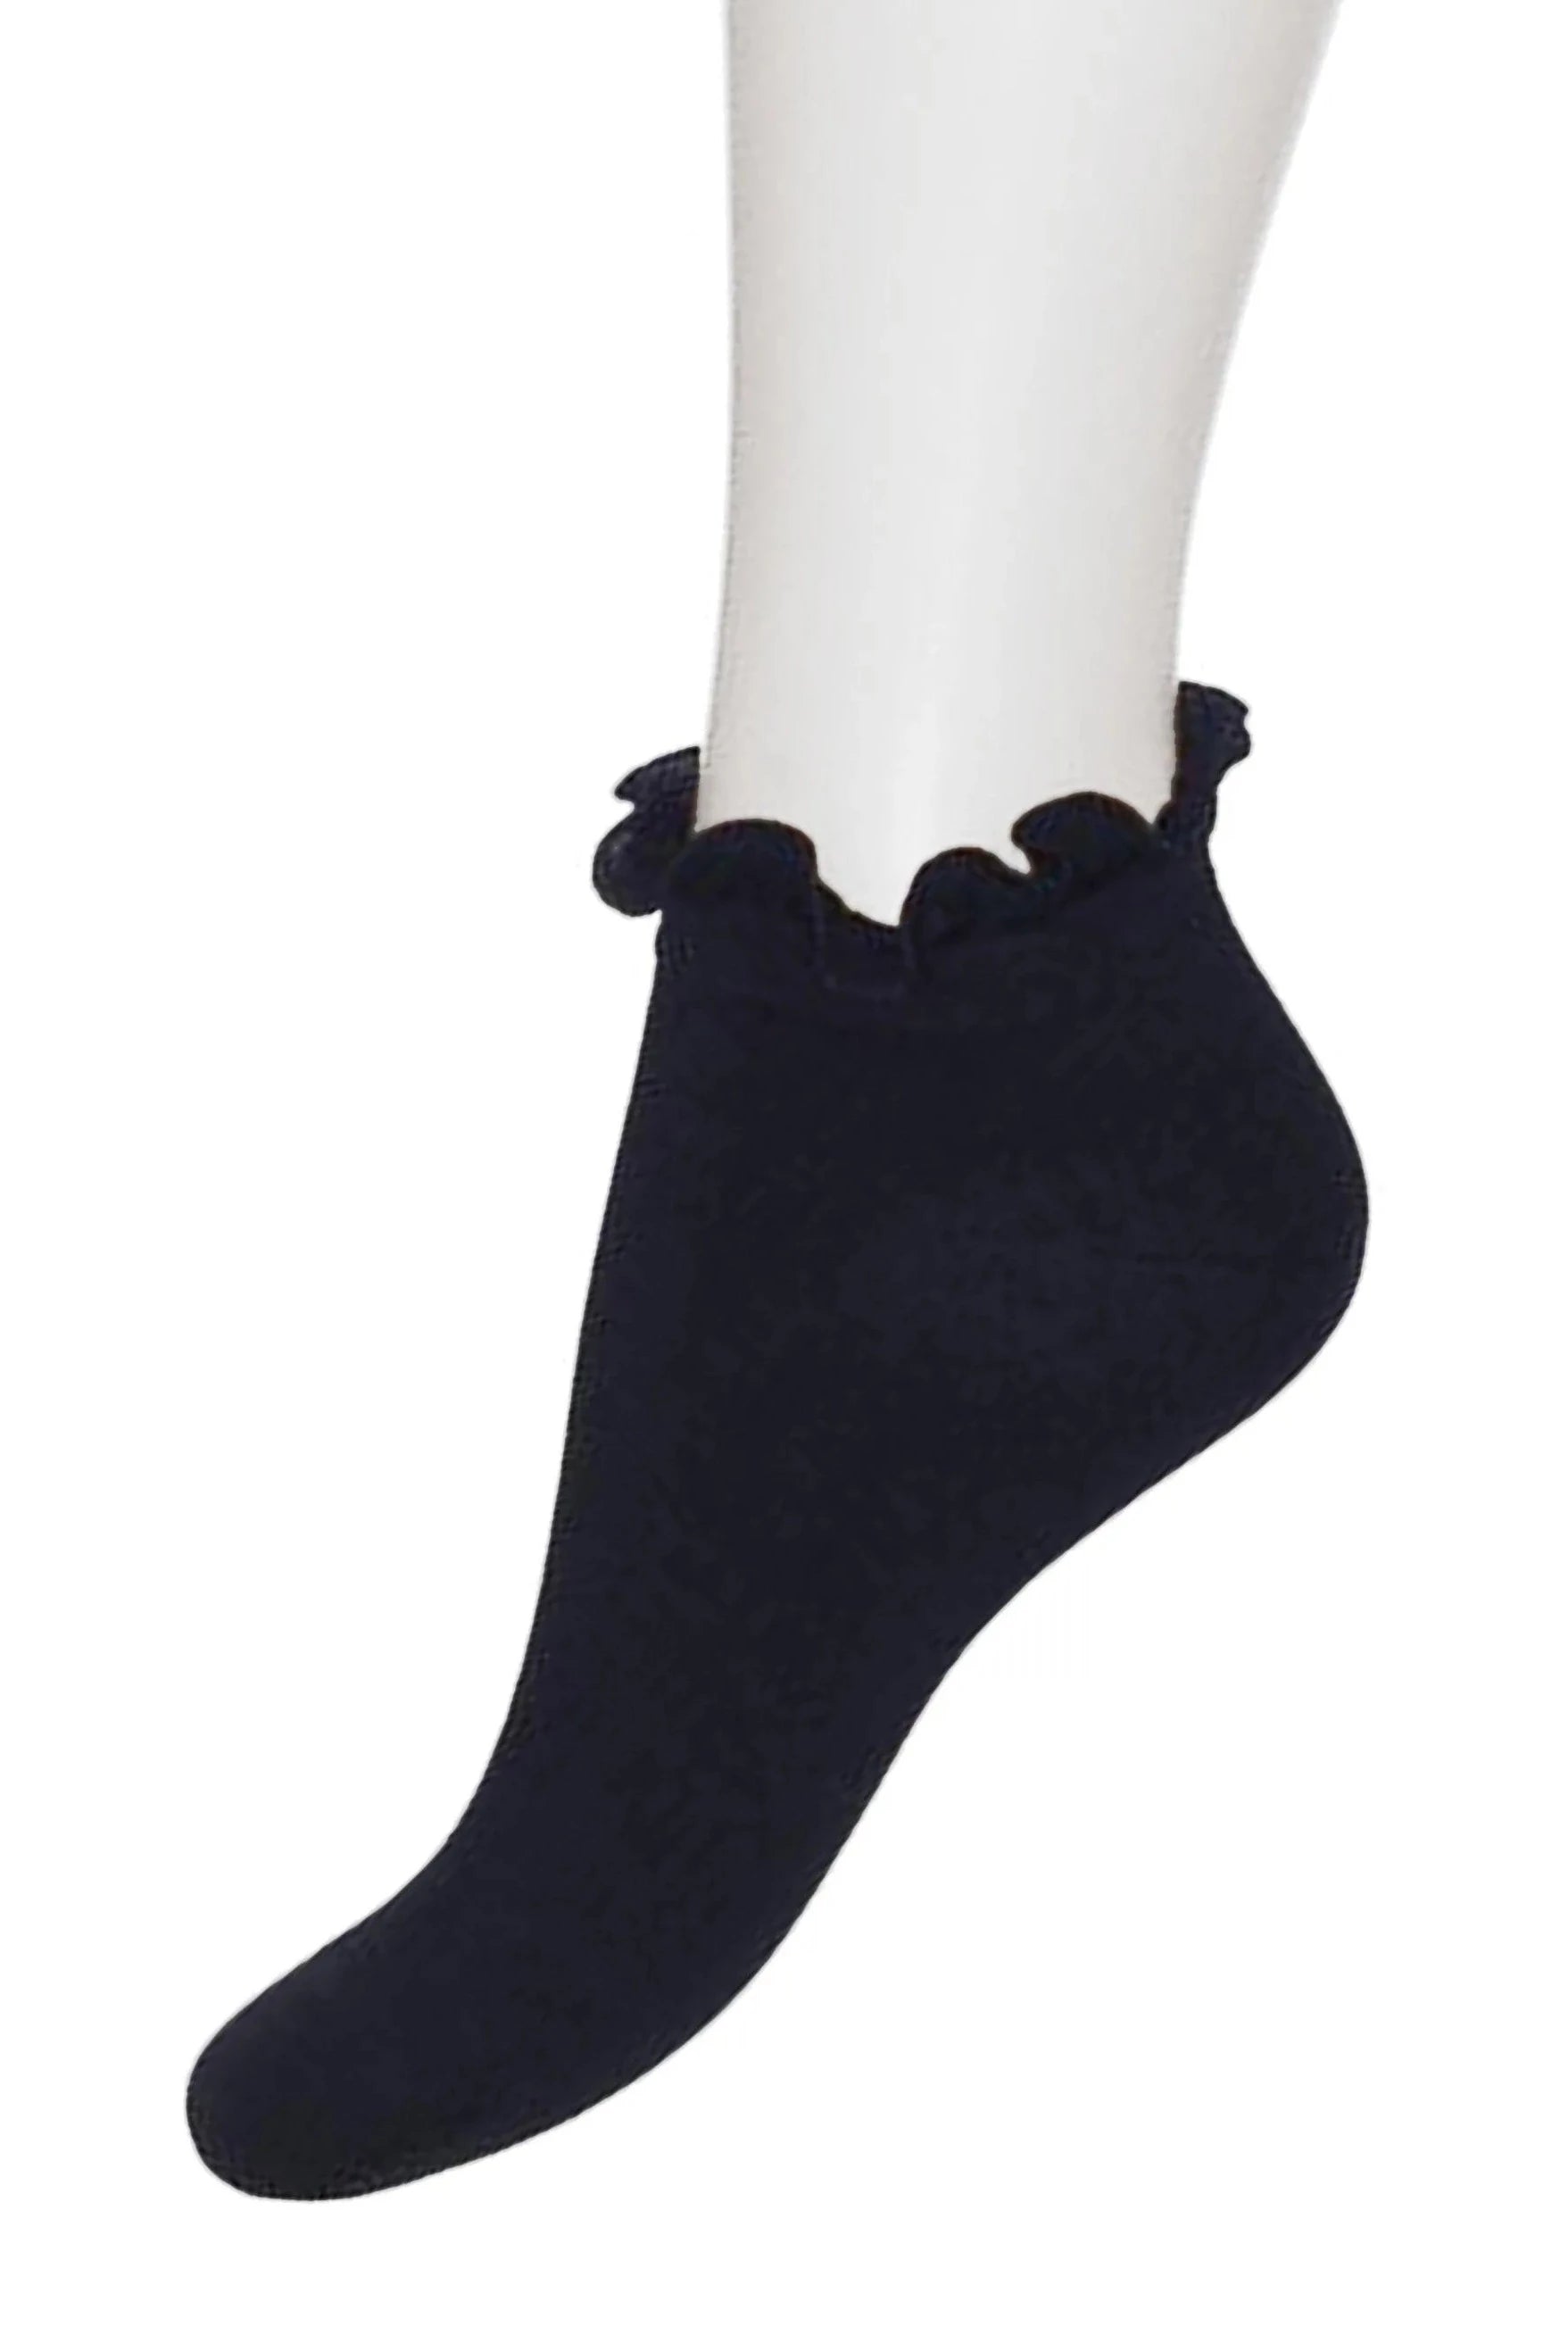 Bonnie Doon BN34.10.19 Lettuce Sock - navy low rise cotton ankle socks with frill cuff